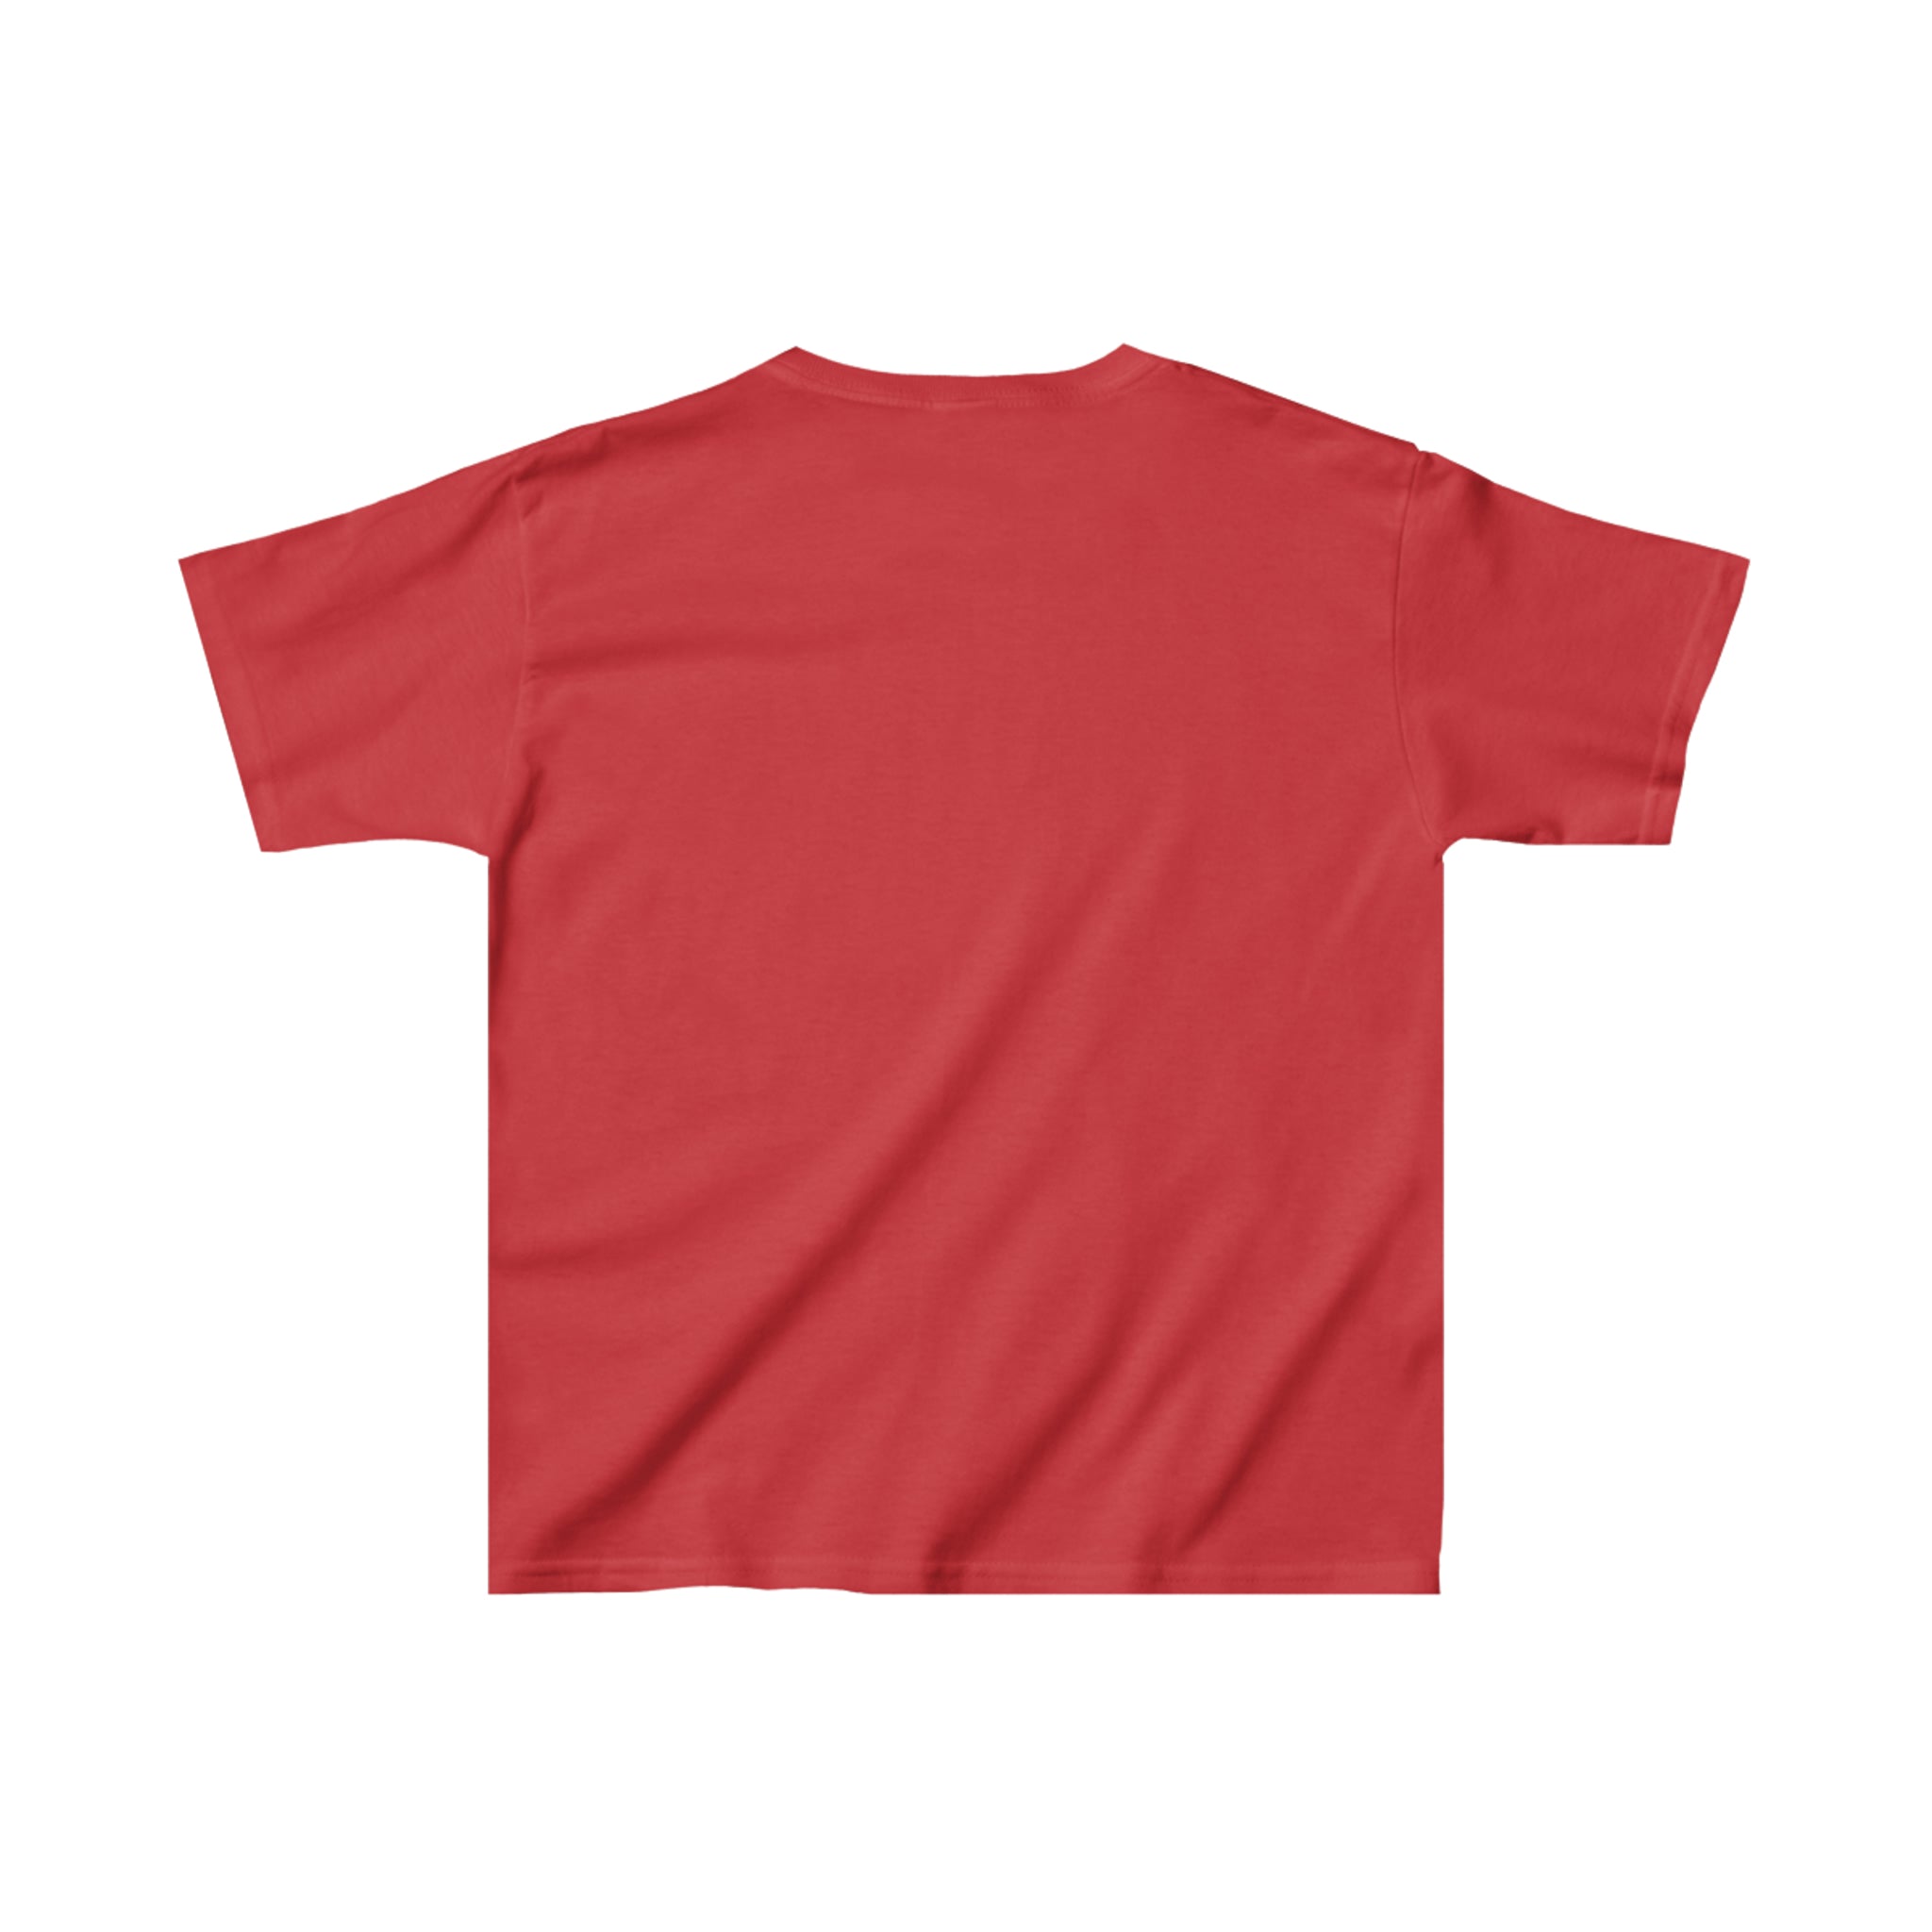 Cape Codders T-Shirt (Youth)